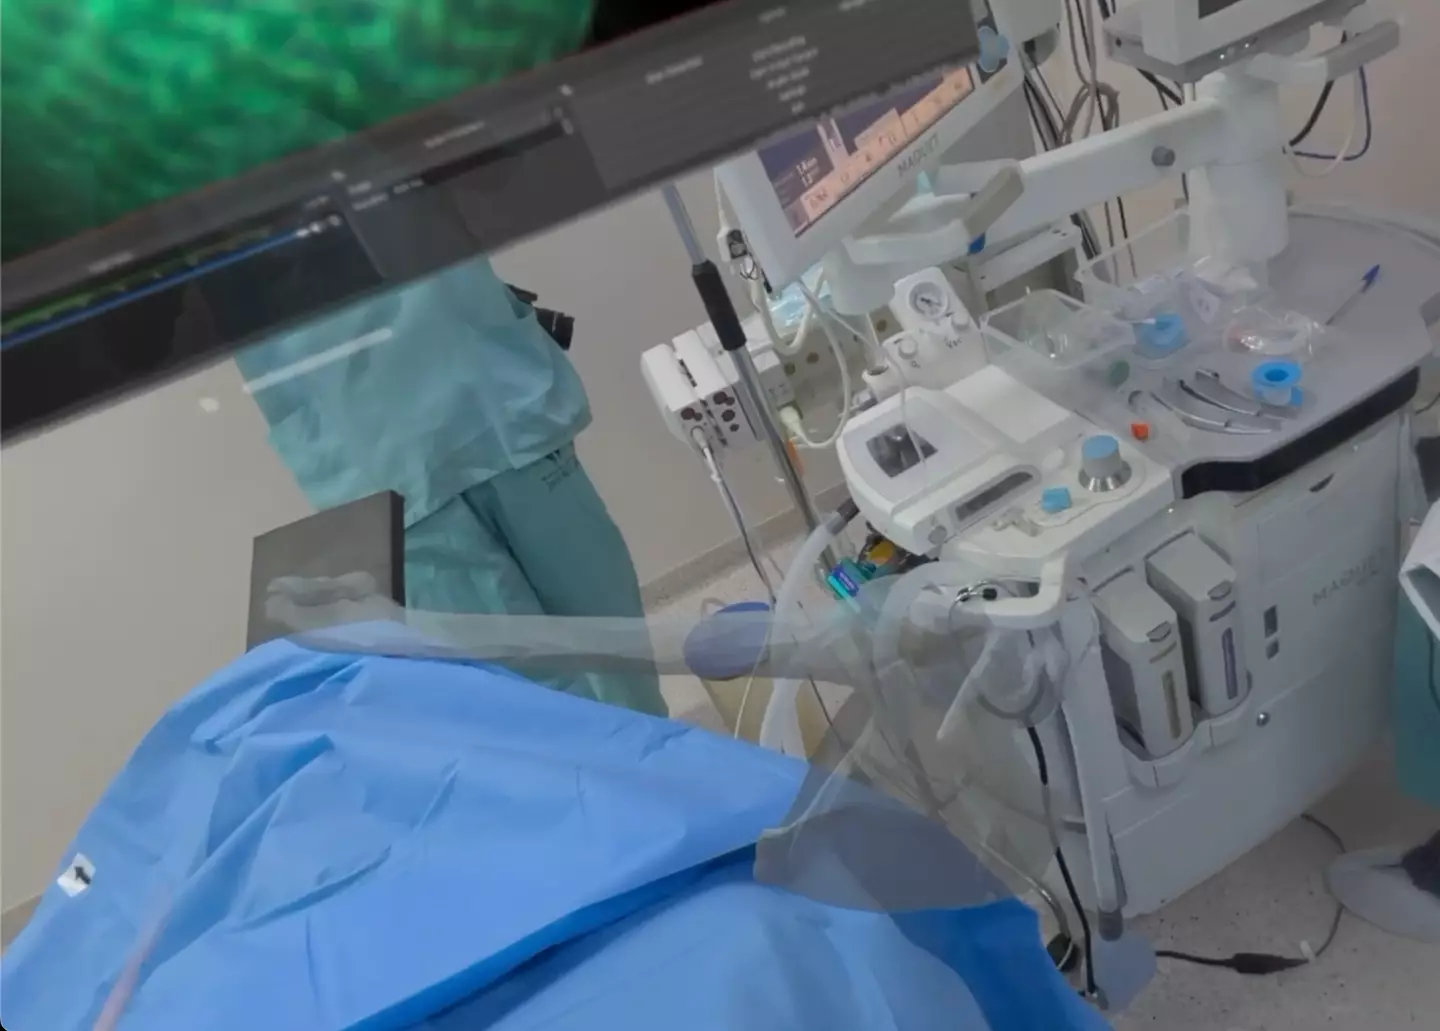 The surgery showed how the device could assist with surgery. (YouTube / ombroecotovelo)